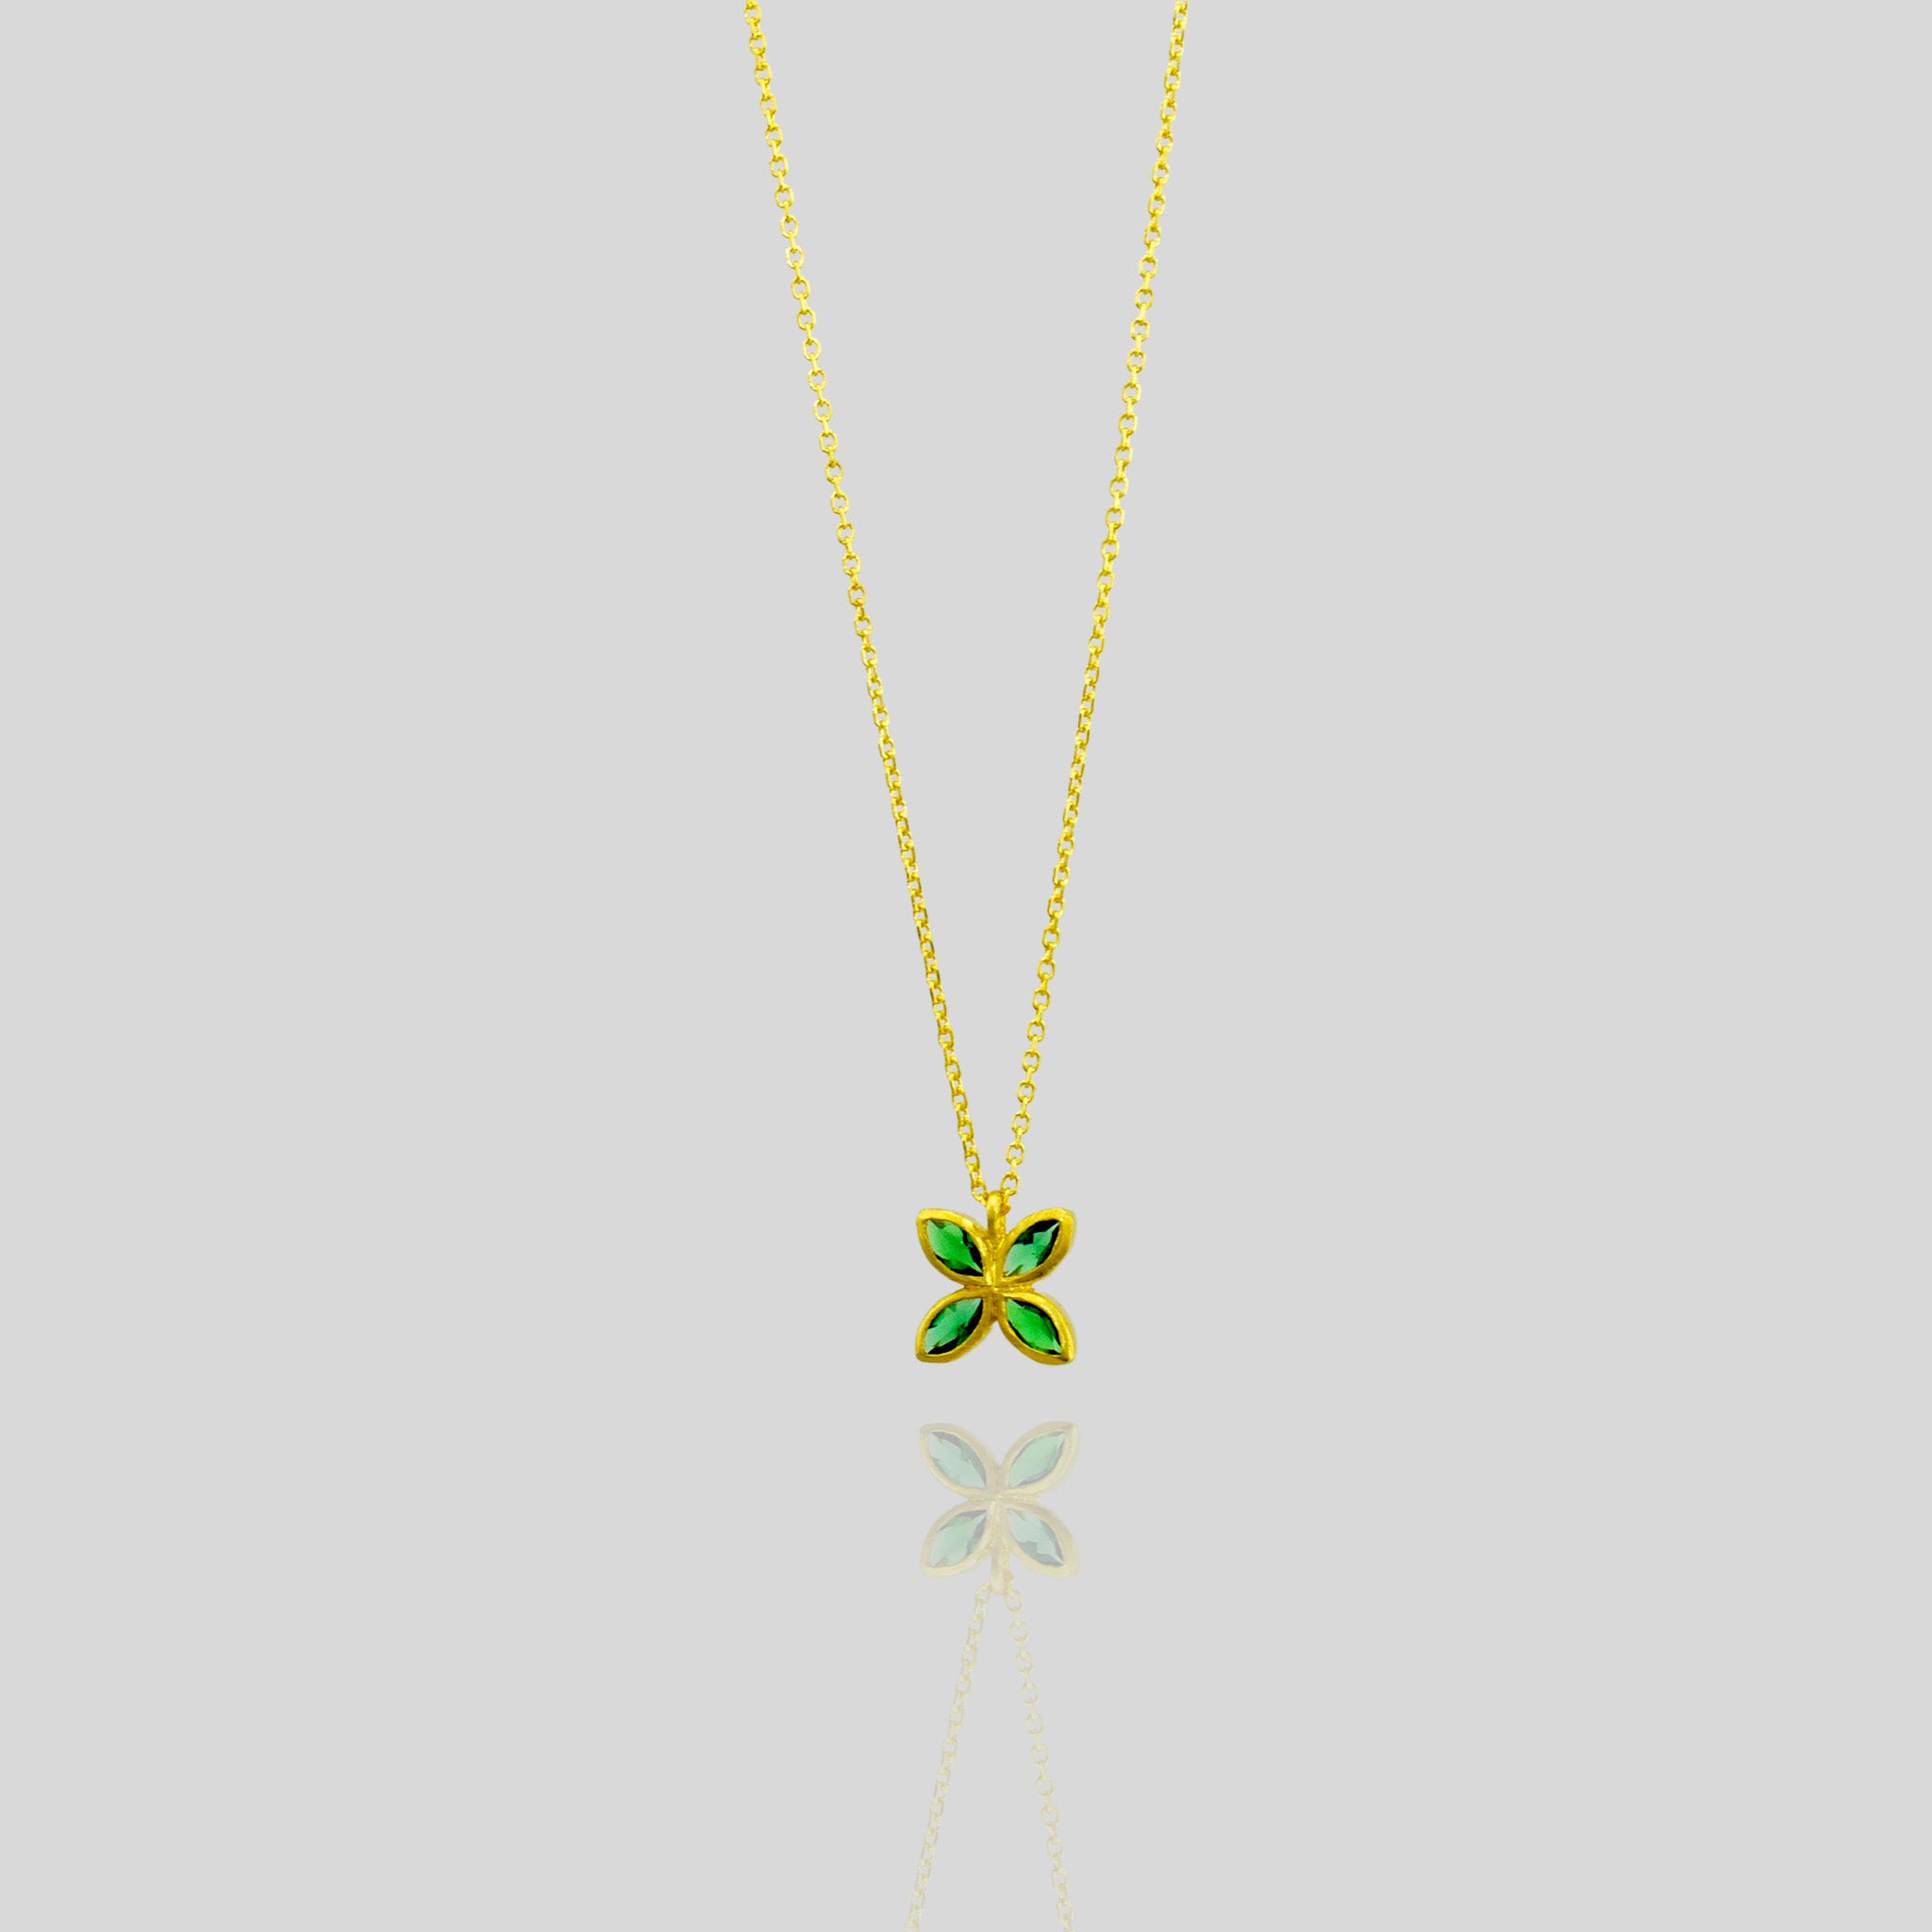 Elegant gold pendant with four marquise-cut Emeralds arranged into a delicate flower design, offering luxury and beauty suitable for any gift occasion.